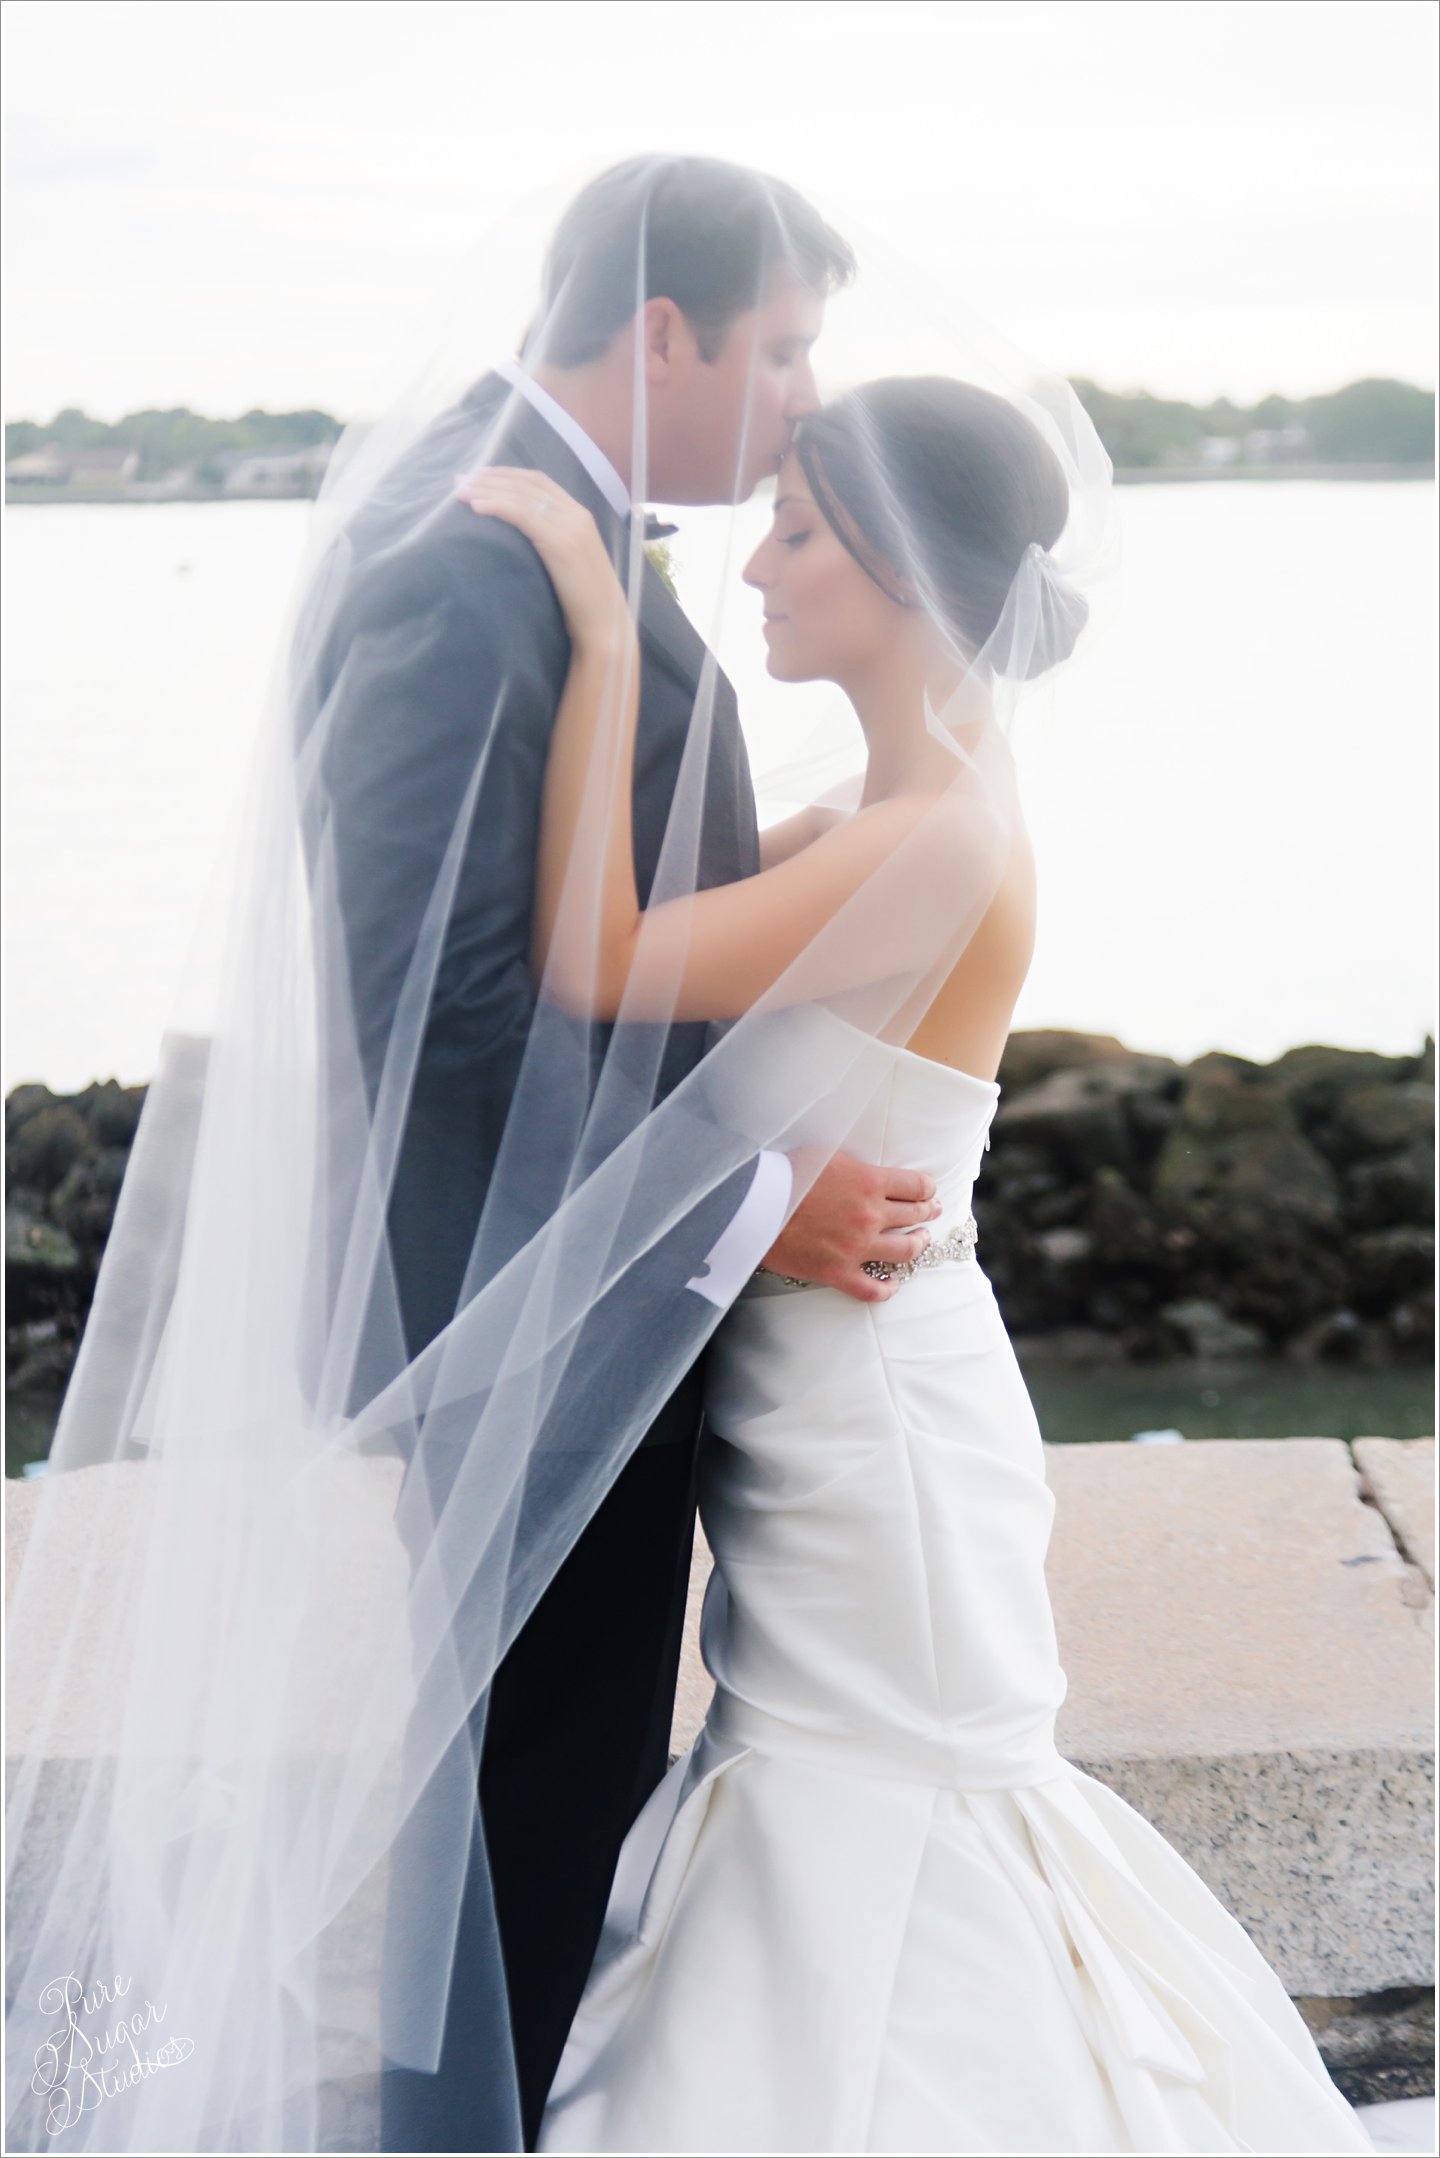 Eli Meyer,Executive Food Service,Monique Lhuillier,Not Too Shabby Bakery,Pure Sugar Studios,St. Augustine Wedding Photographer,Stephanie Bolen,The Couple,The Rivertwon band,Treasury,Treasury on the Plaza,evrything with plants and flowers,v,